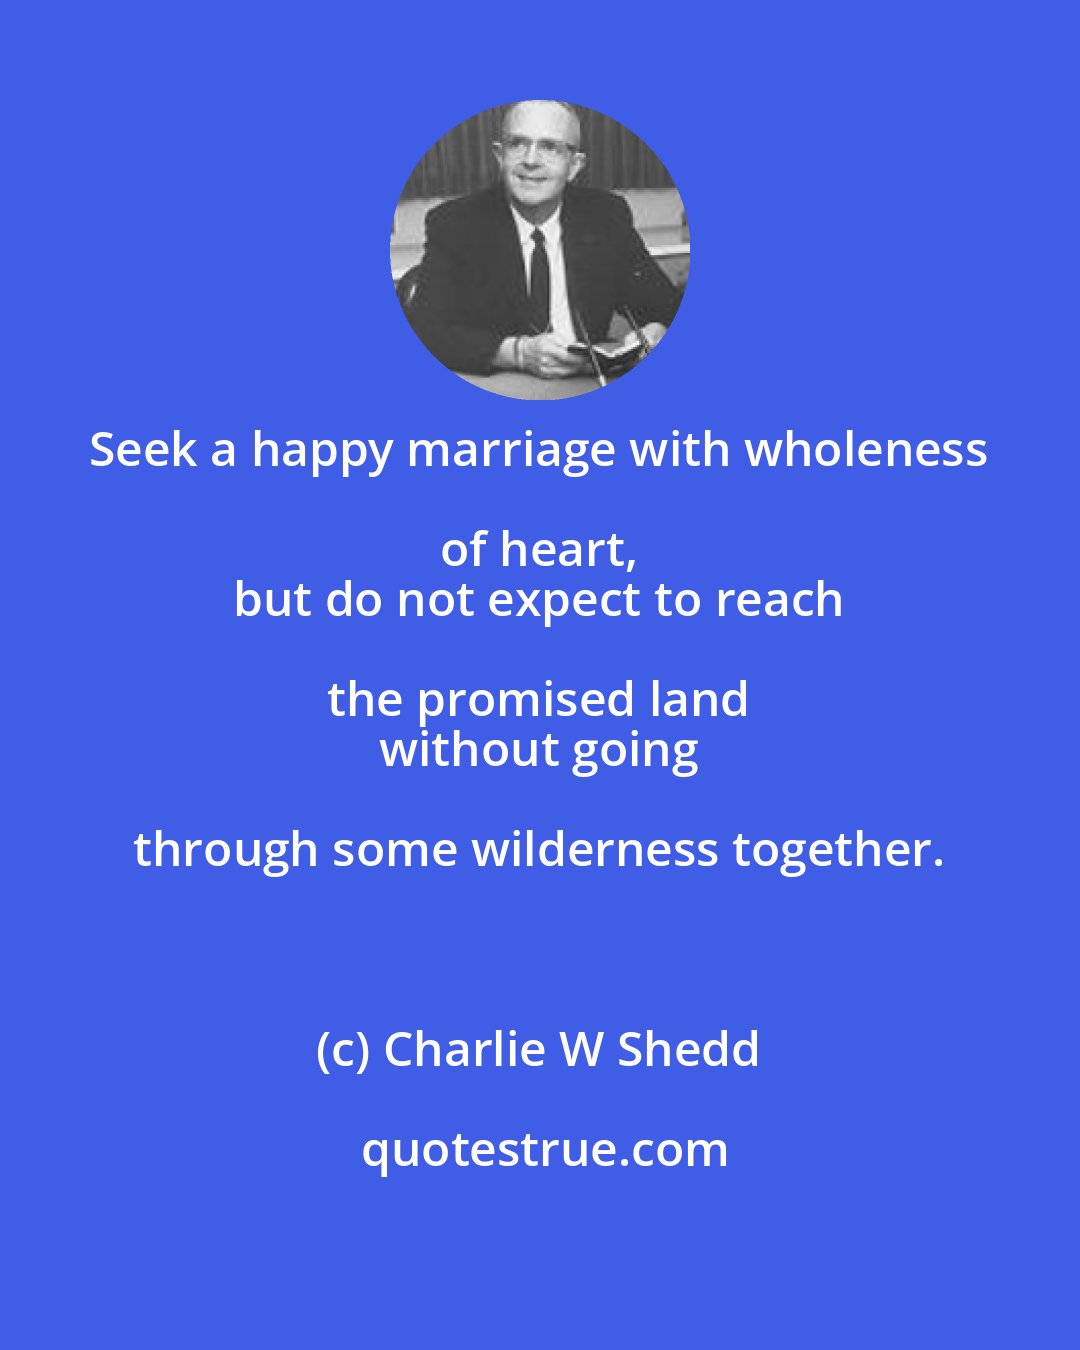 Charlie W Shedd: Seek a happy marriage with wholeness of heart, 
 but do not expect to reach the promised land 
 without going through some wilderness together.